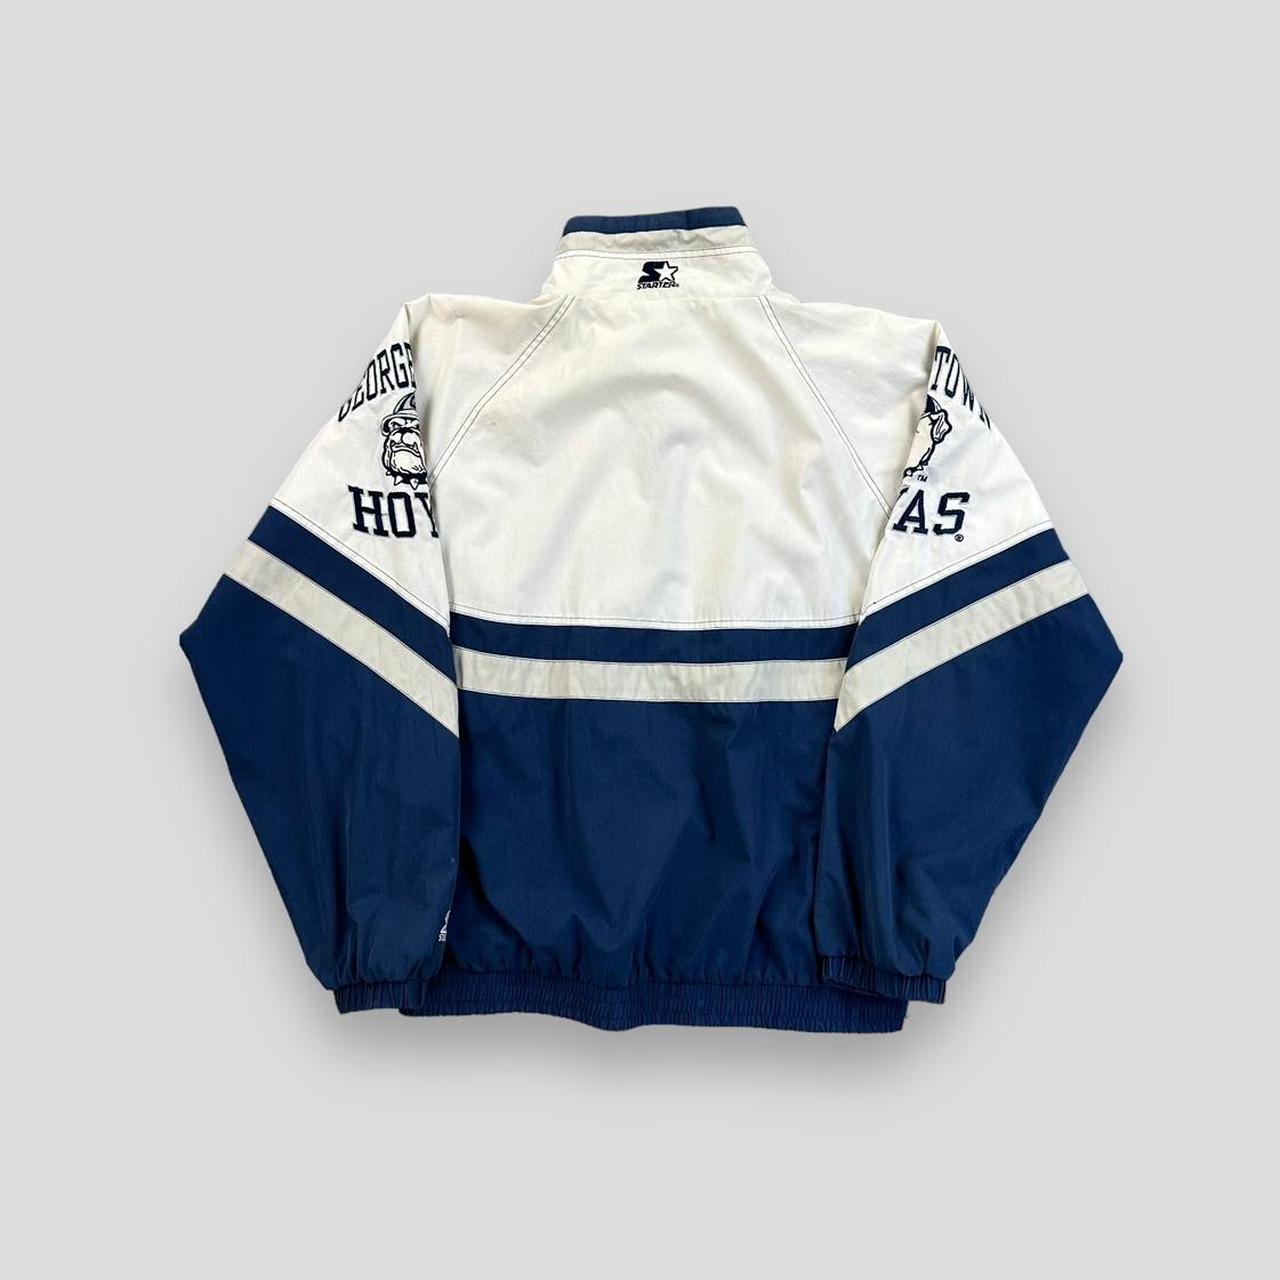 Starter Men's White and Navy Jacket - A2 Jackets